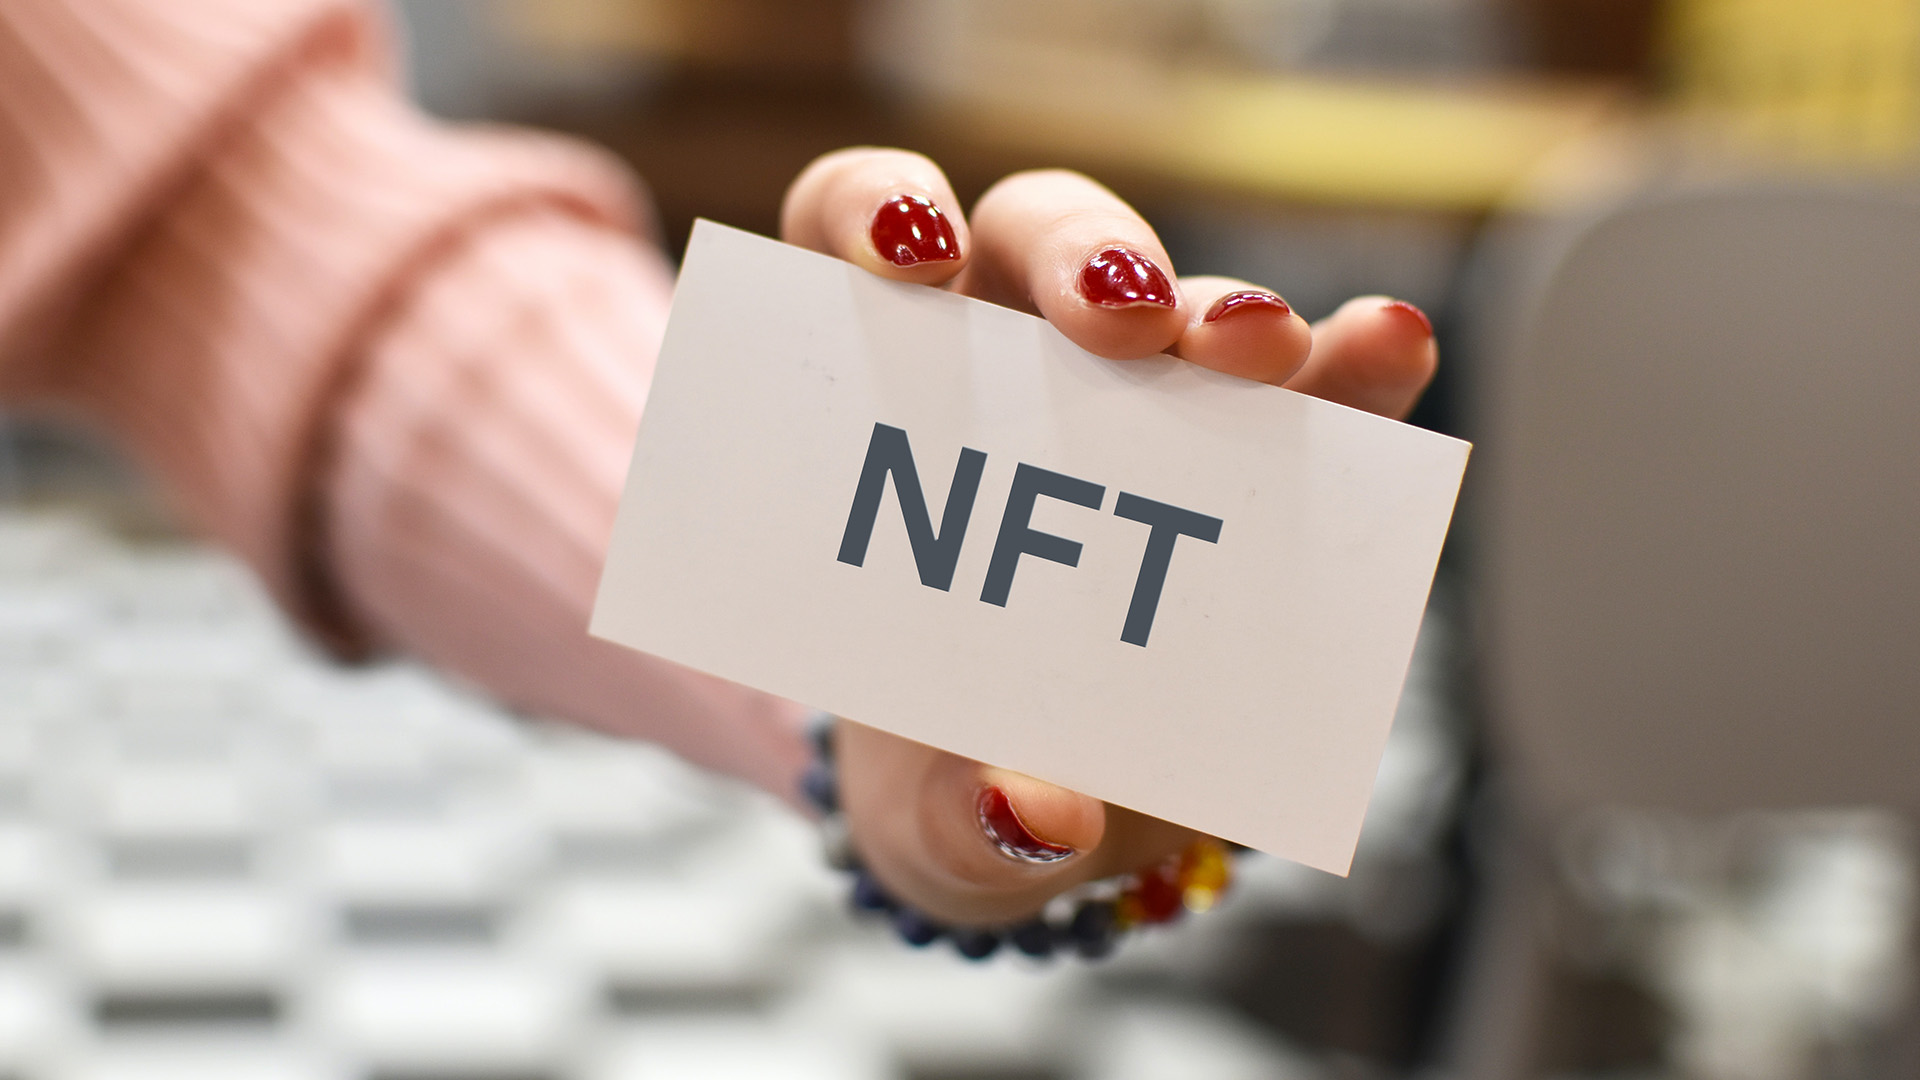 Hand holding and showing a card that says "NFT" on it. 